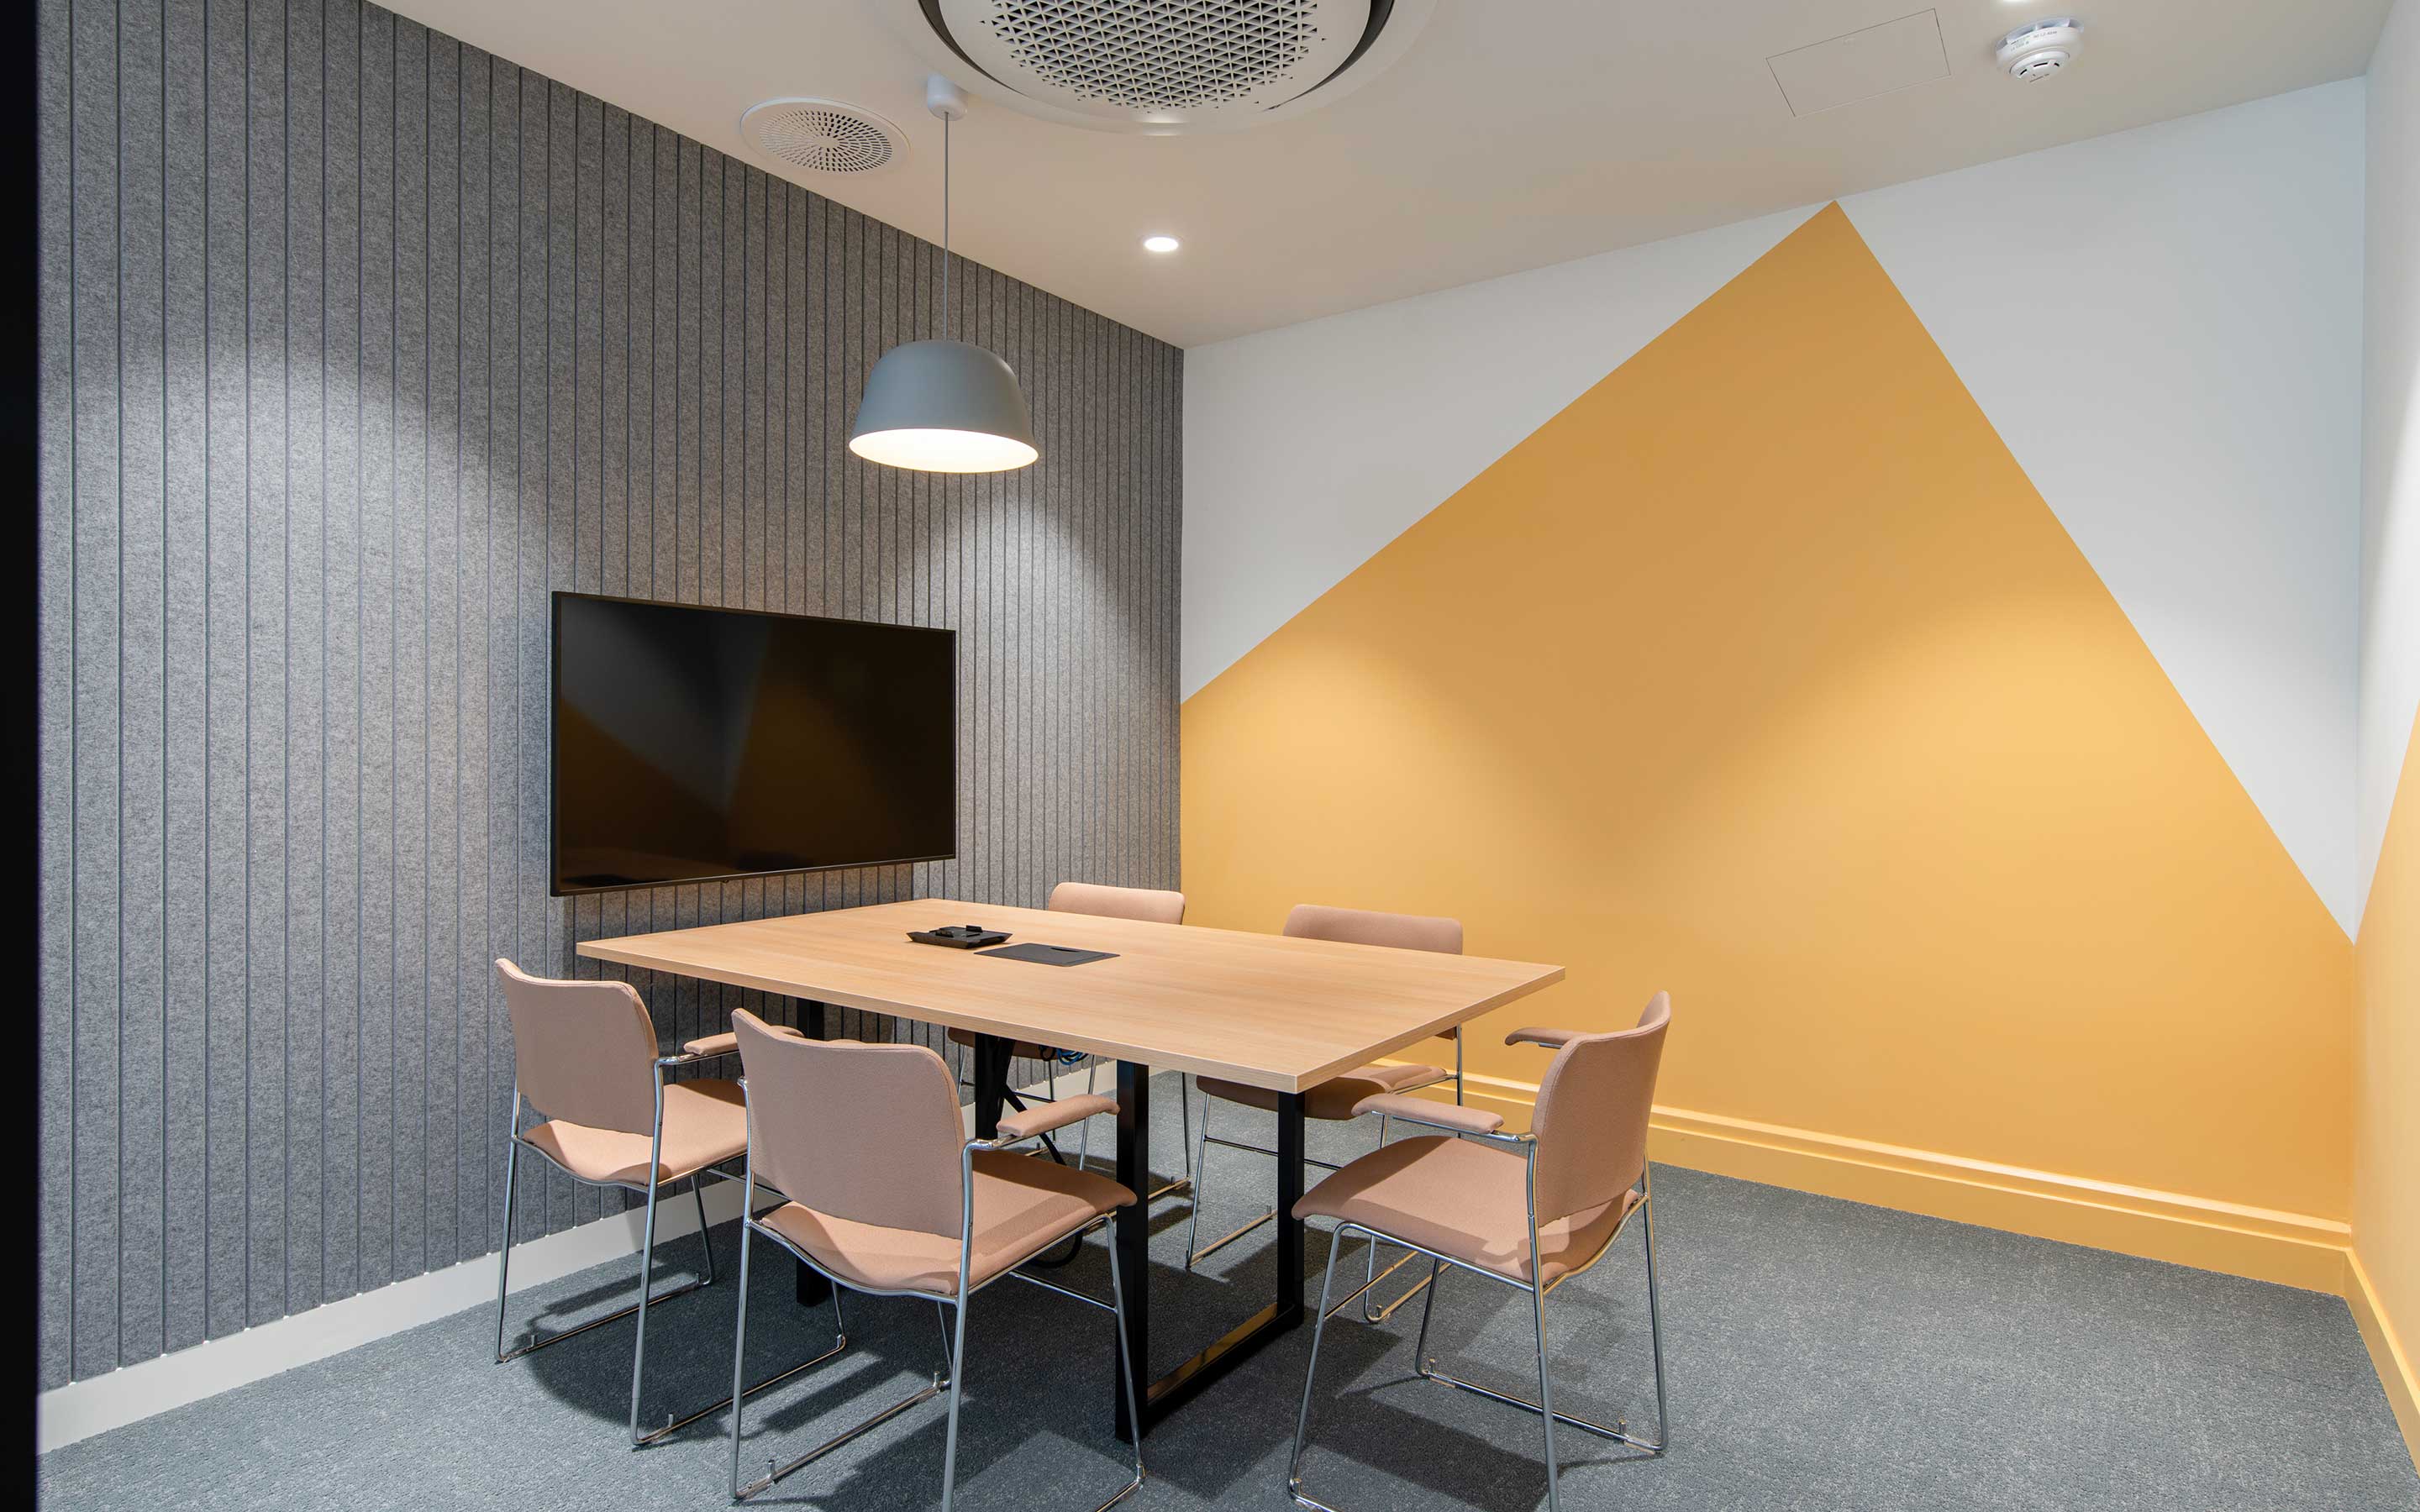 A meeting room in a sleek office interior design, with acoustic panels, sunshine yellow wall detailing, and technology